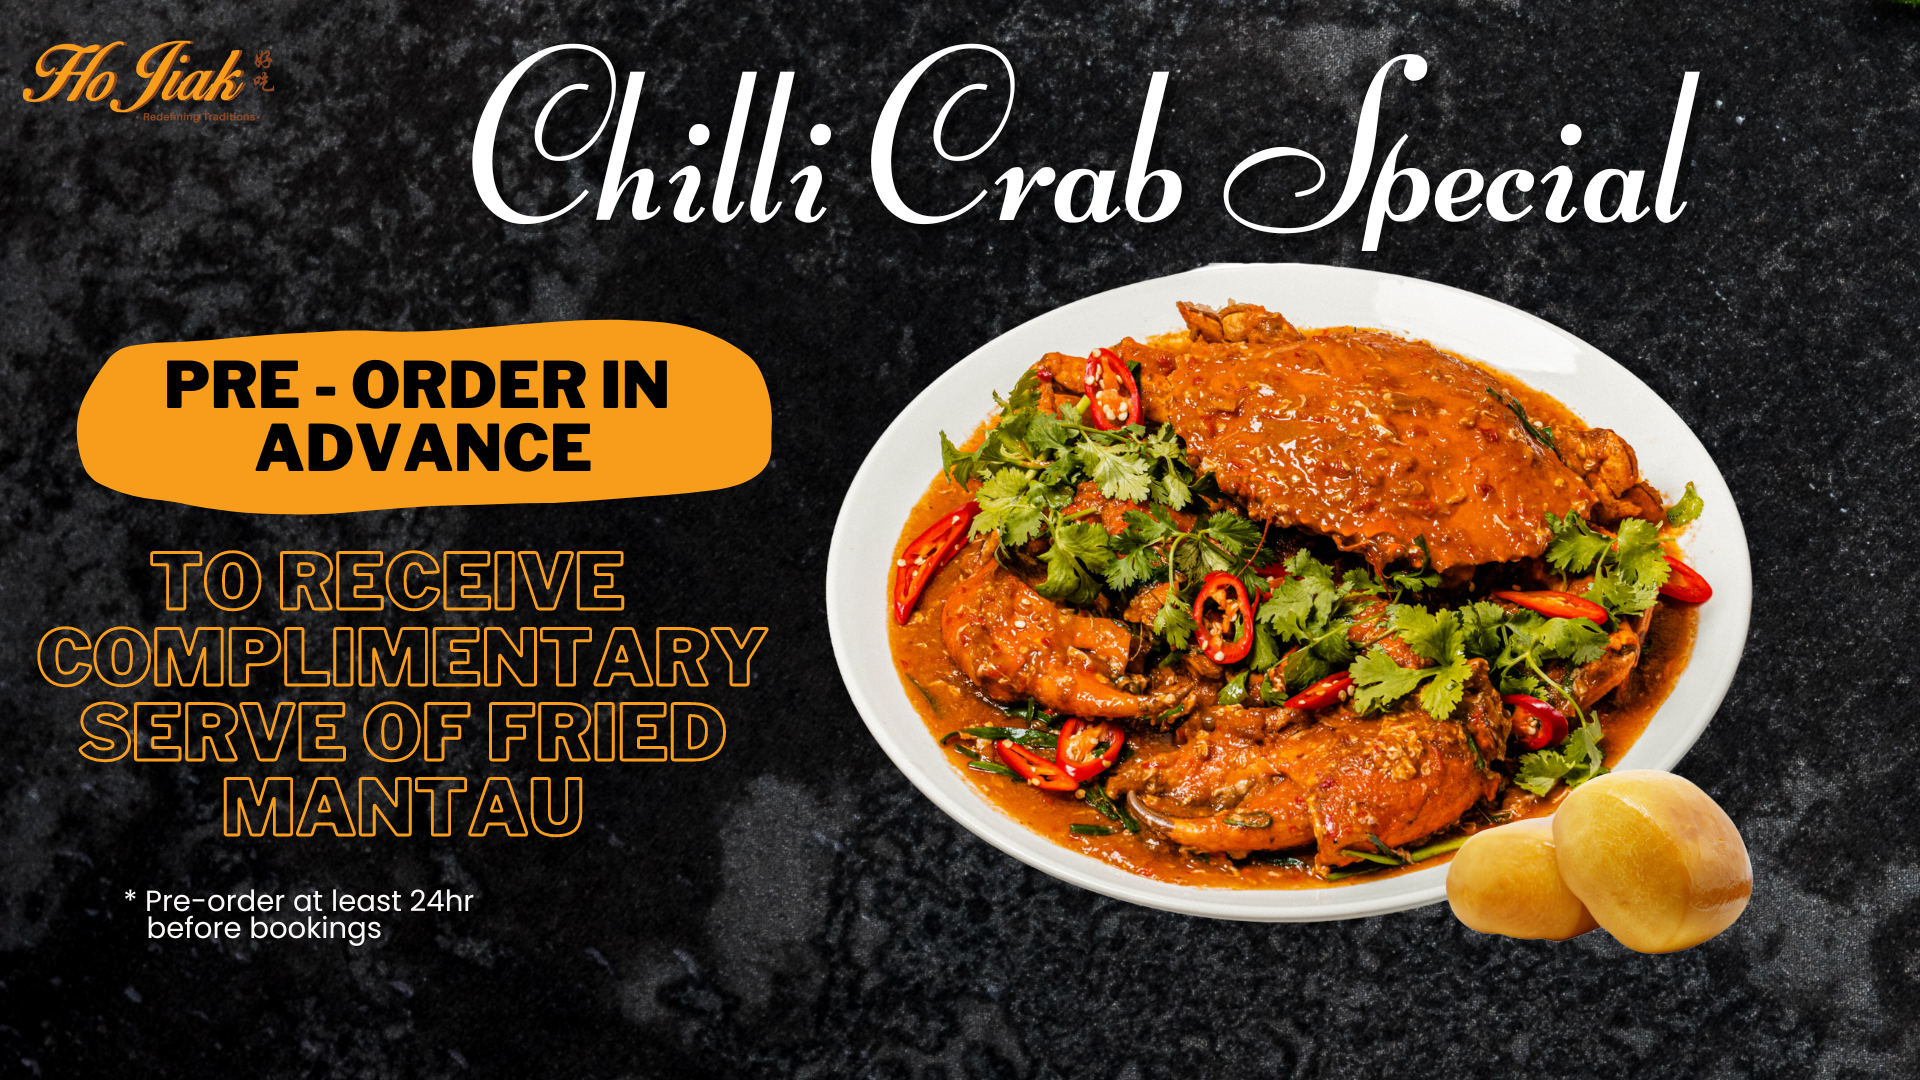 A complimentary side of 4pcs of fried man tau with every pre-order of Chilli Crab.